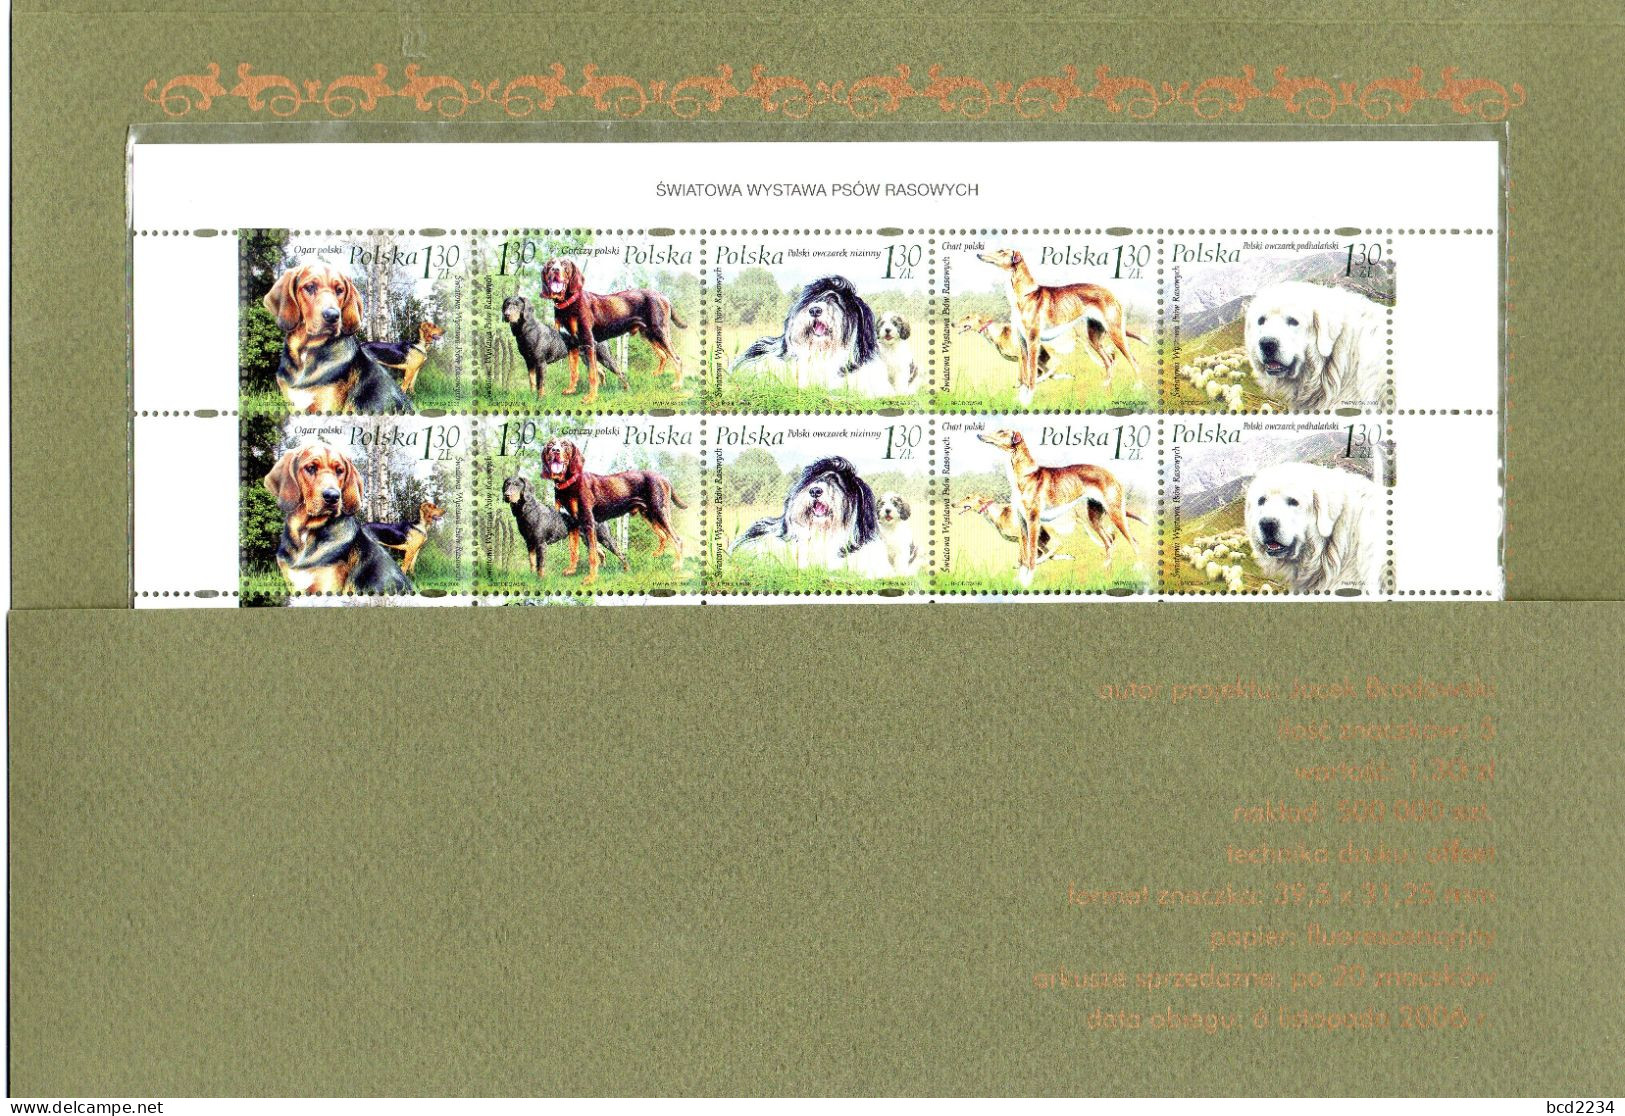 POLAND 2006 RARE POLISH POST OFFICE LIMITED EDITION FOLDER: SHEET OF 20 STAMPS OF WORLD EXHIBITION SHOW PEDIGREE DOGS - Blocs & Feuillets